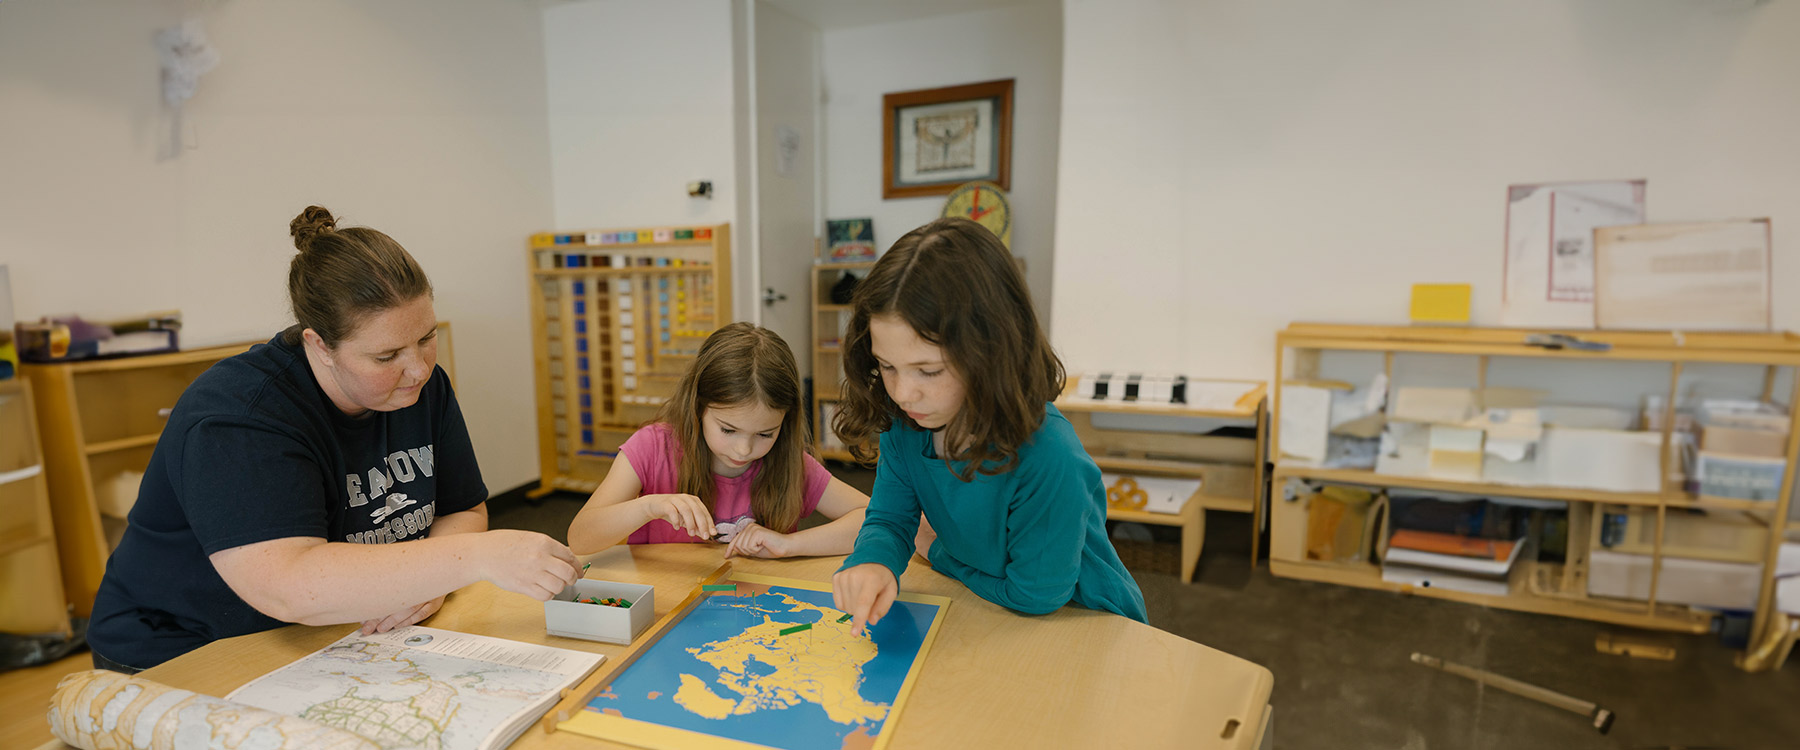 A teacher and two elementary students, seated at a table, place pins in a map.